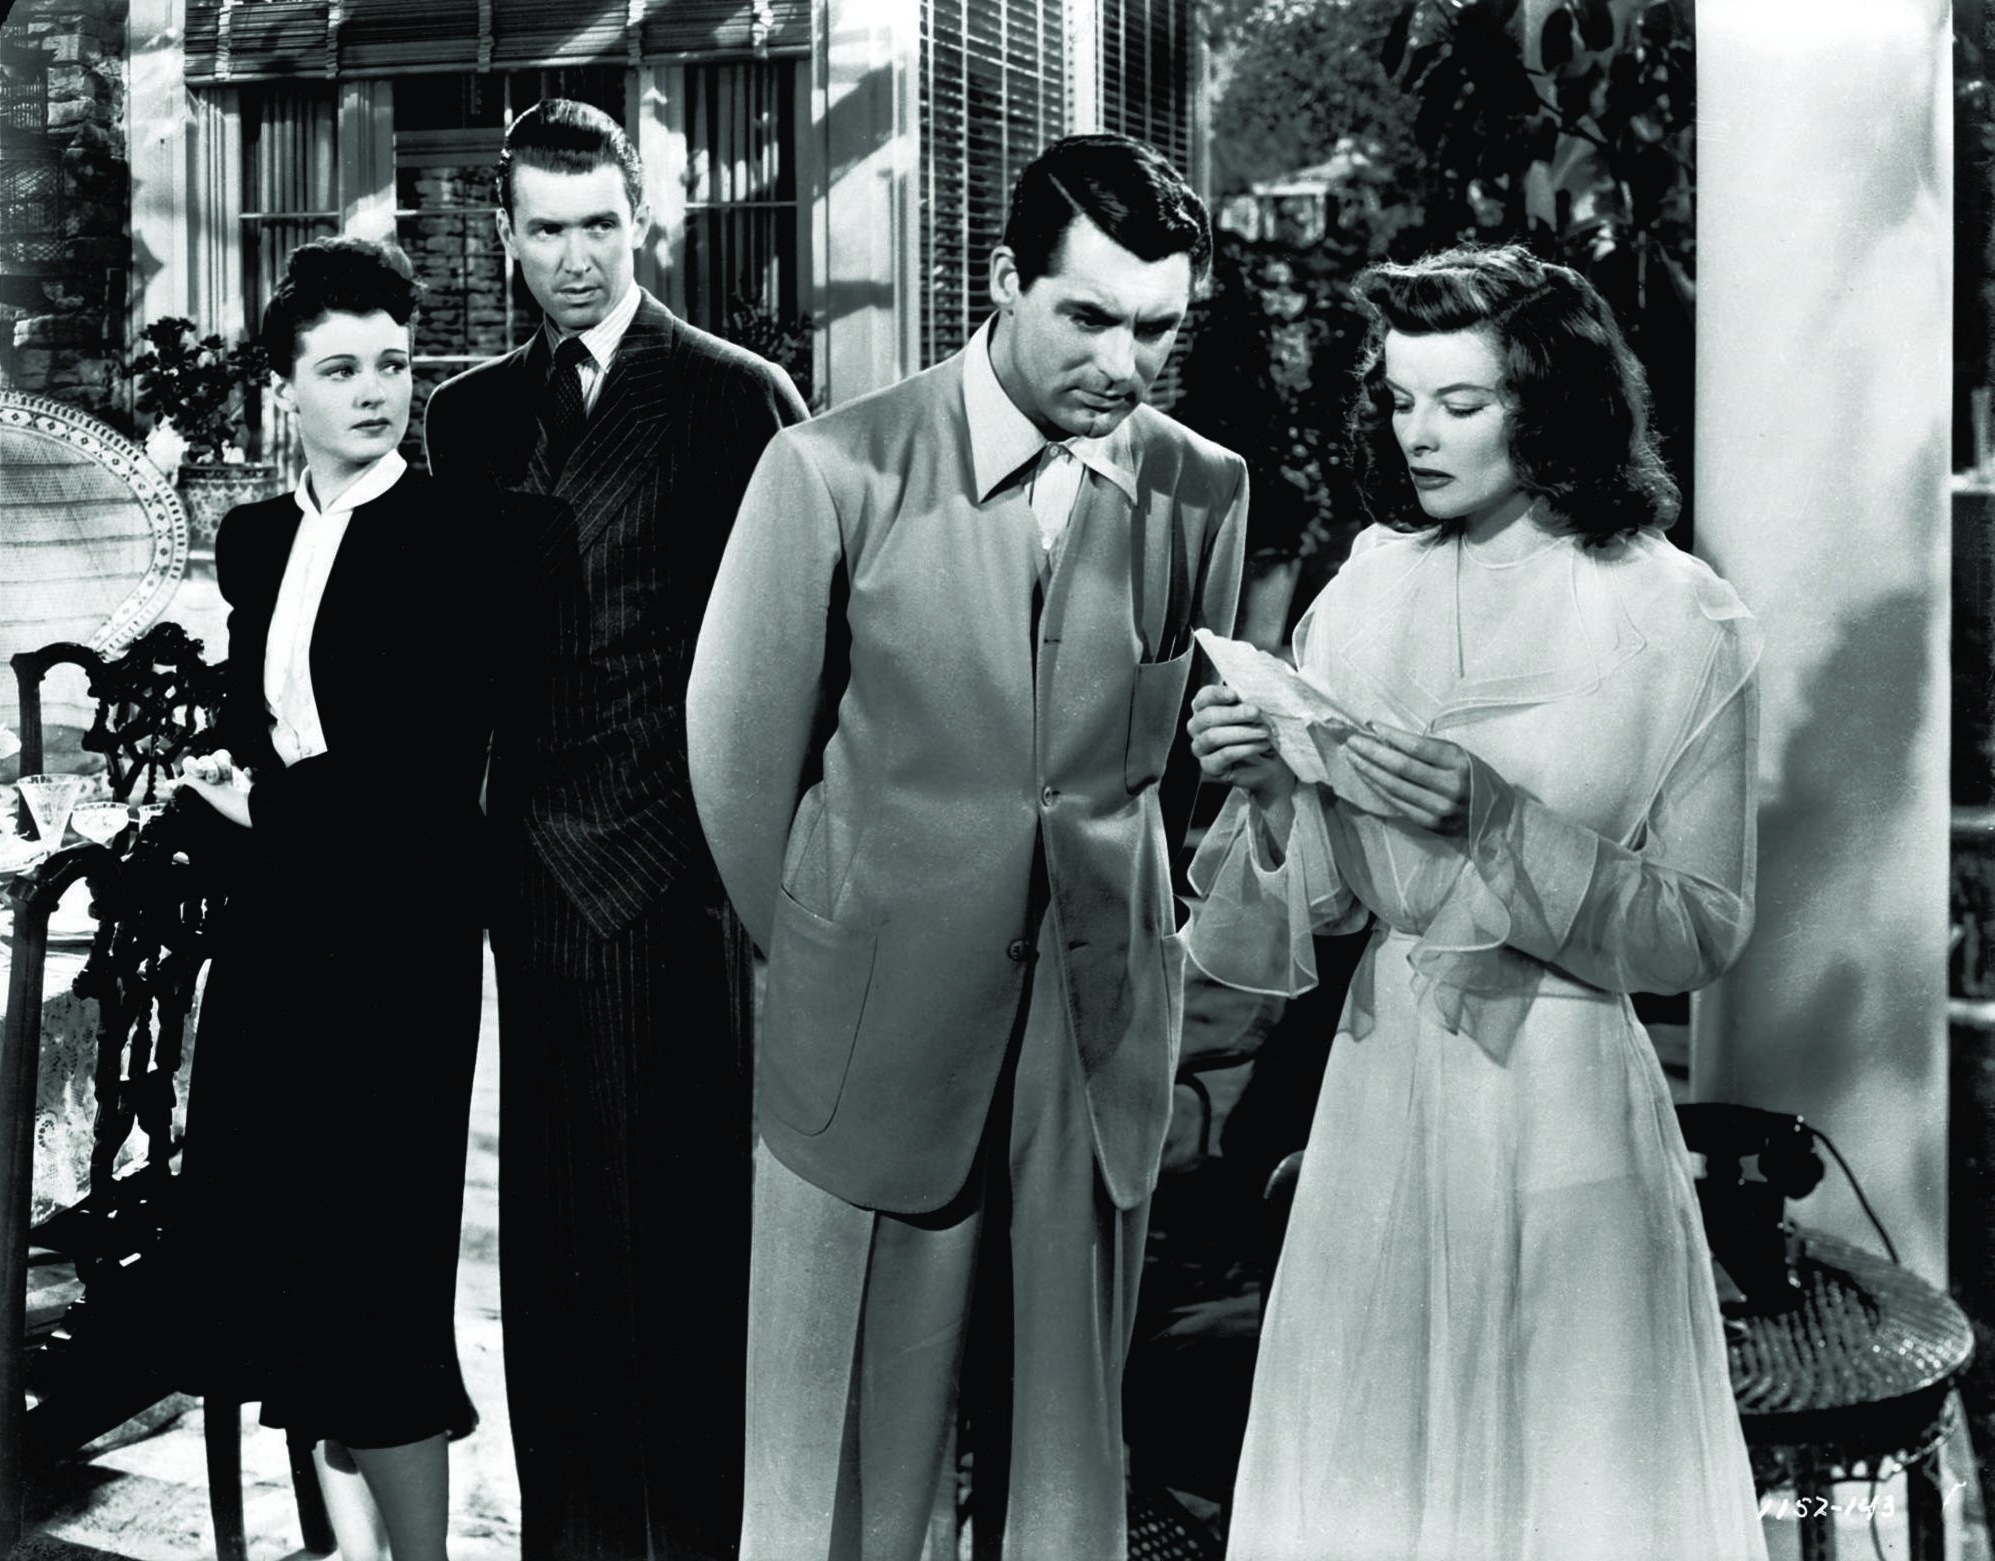 Still of Cary Grant, Katharine Hepburn, James Stewart and Ruth Hussey in The Philadelphia Story (1940)